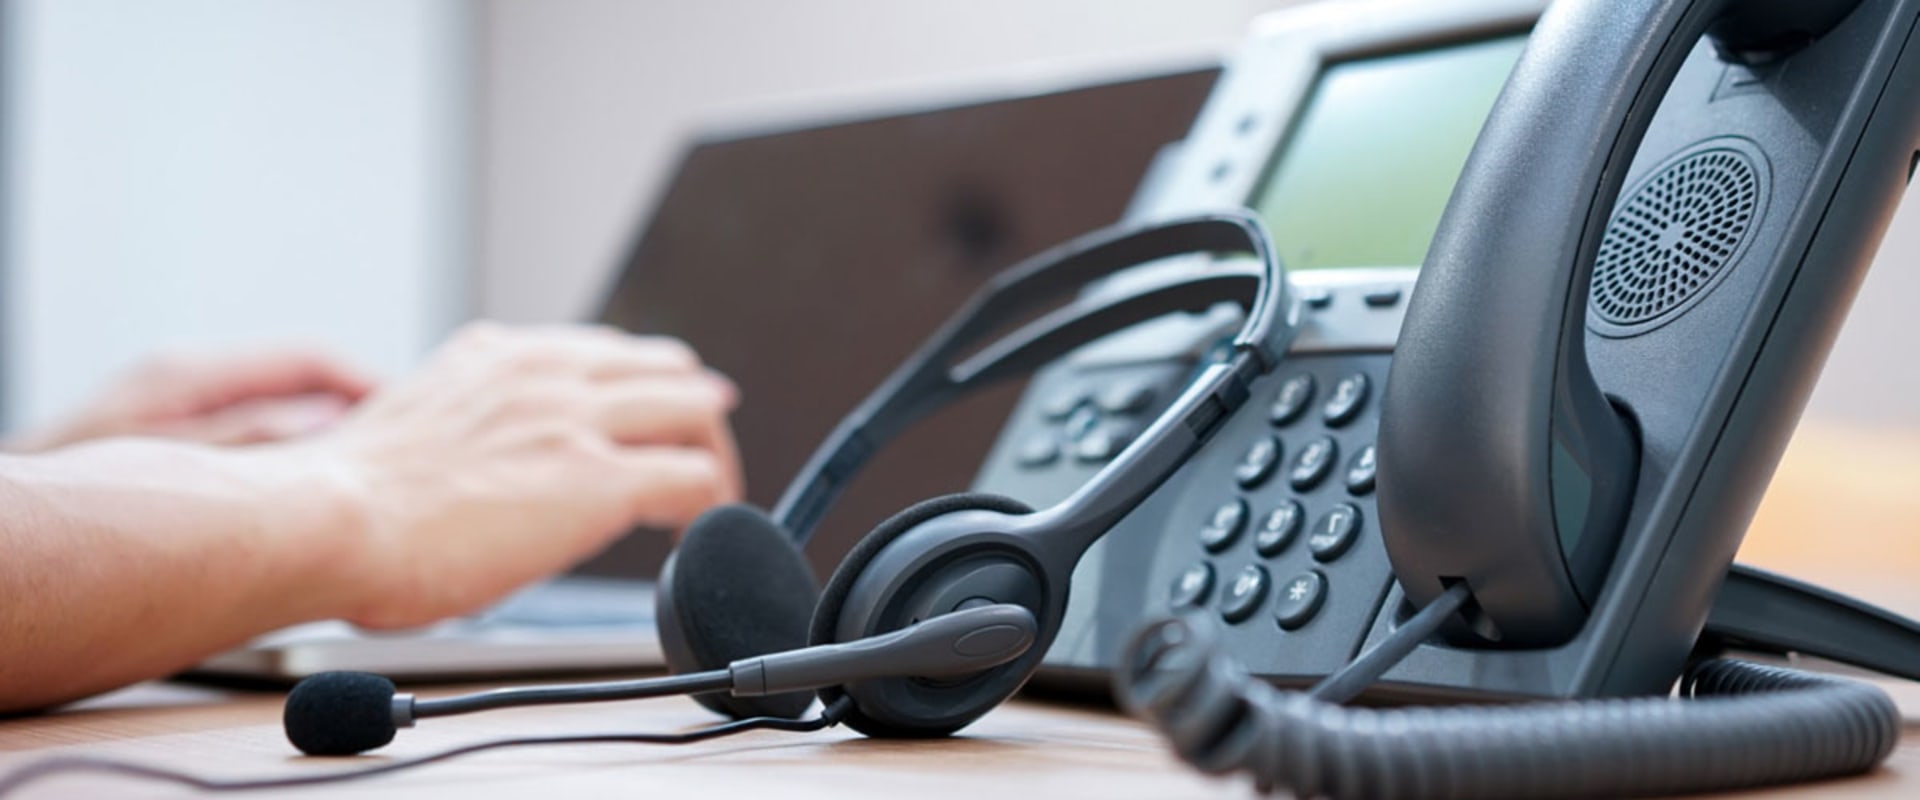 Why You Need a VoIP Service Provider